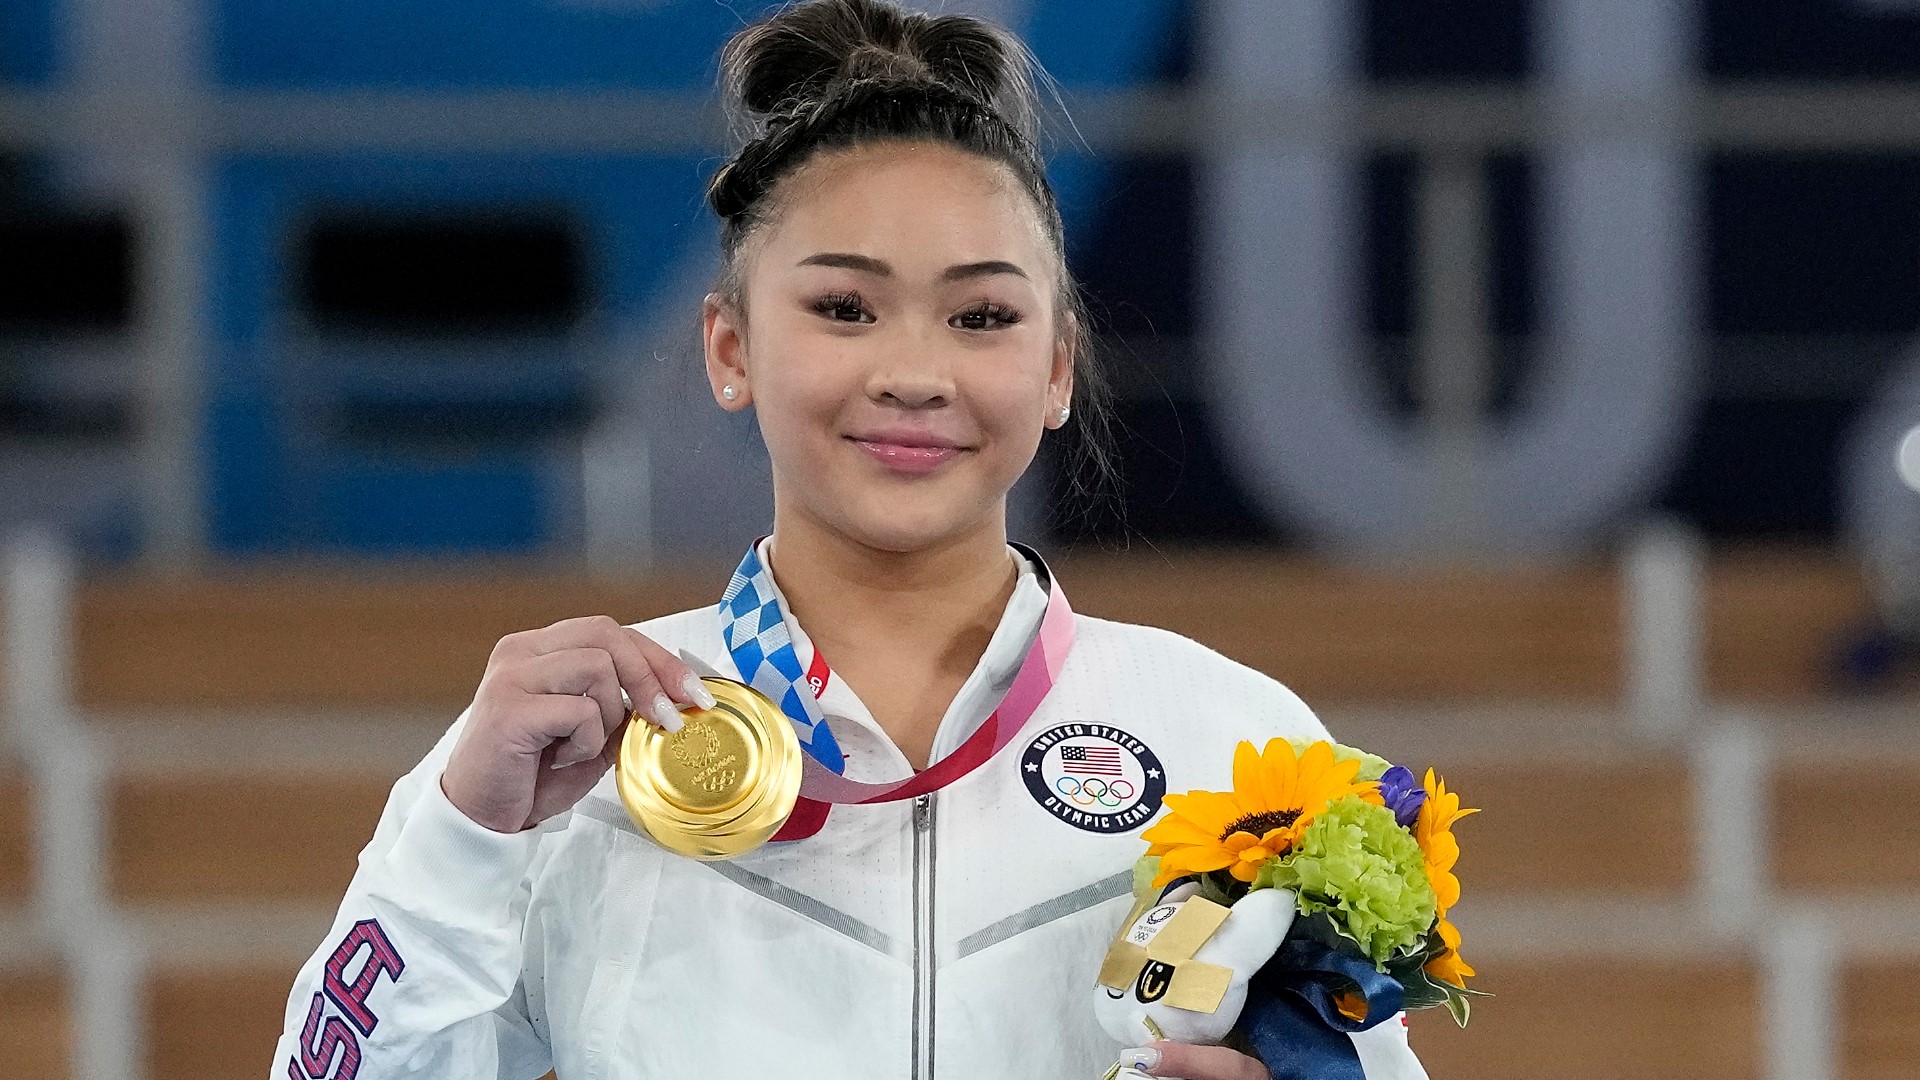 Sunisa Lee cemented her name in Olympic history as she captured gold for Team USA in the individual all-around Thursday at the Tokyo 2020 Olympics.